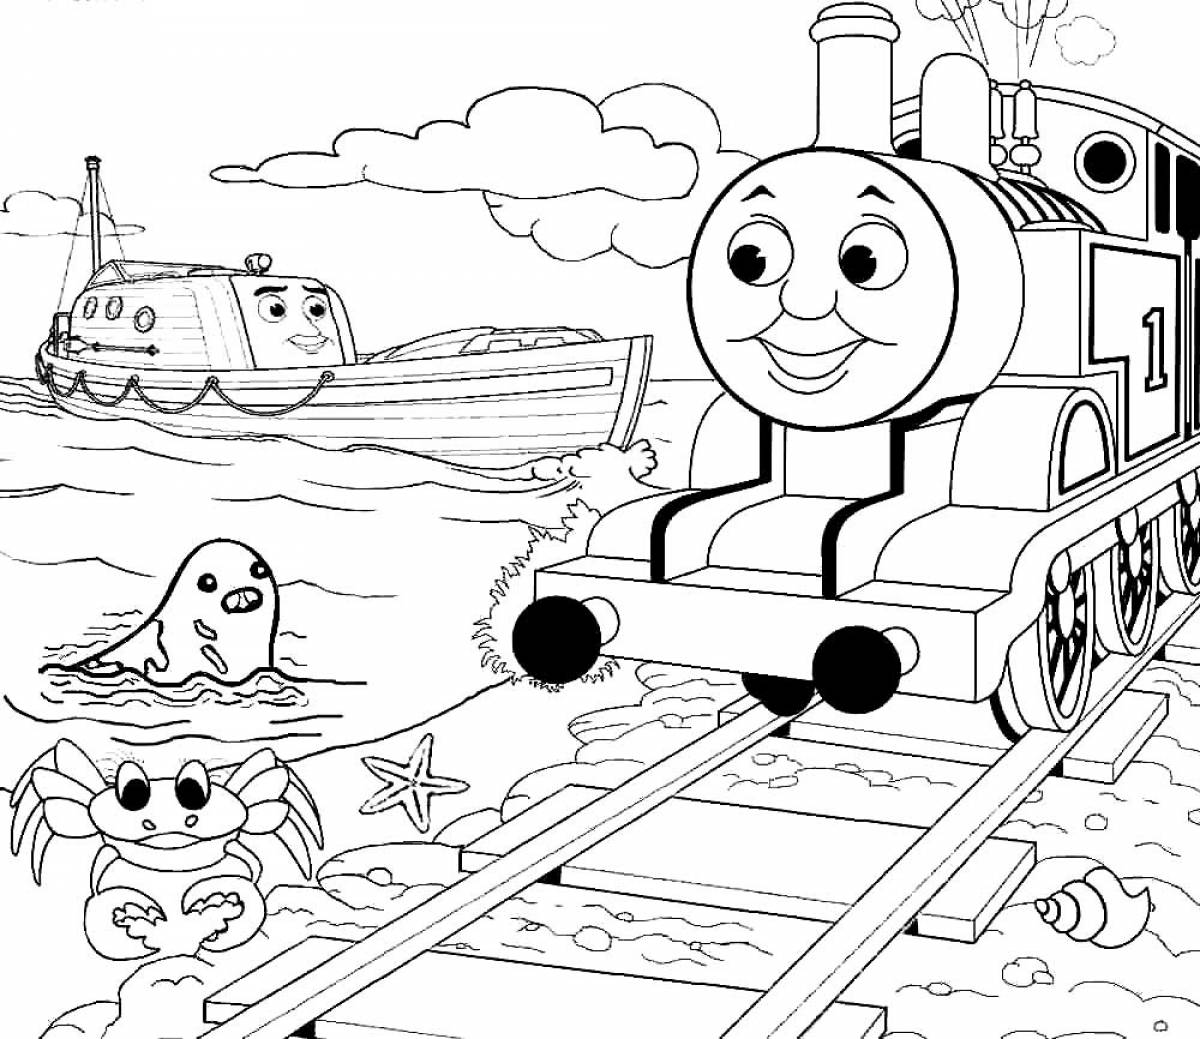 Thomas the engine and the ship